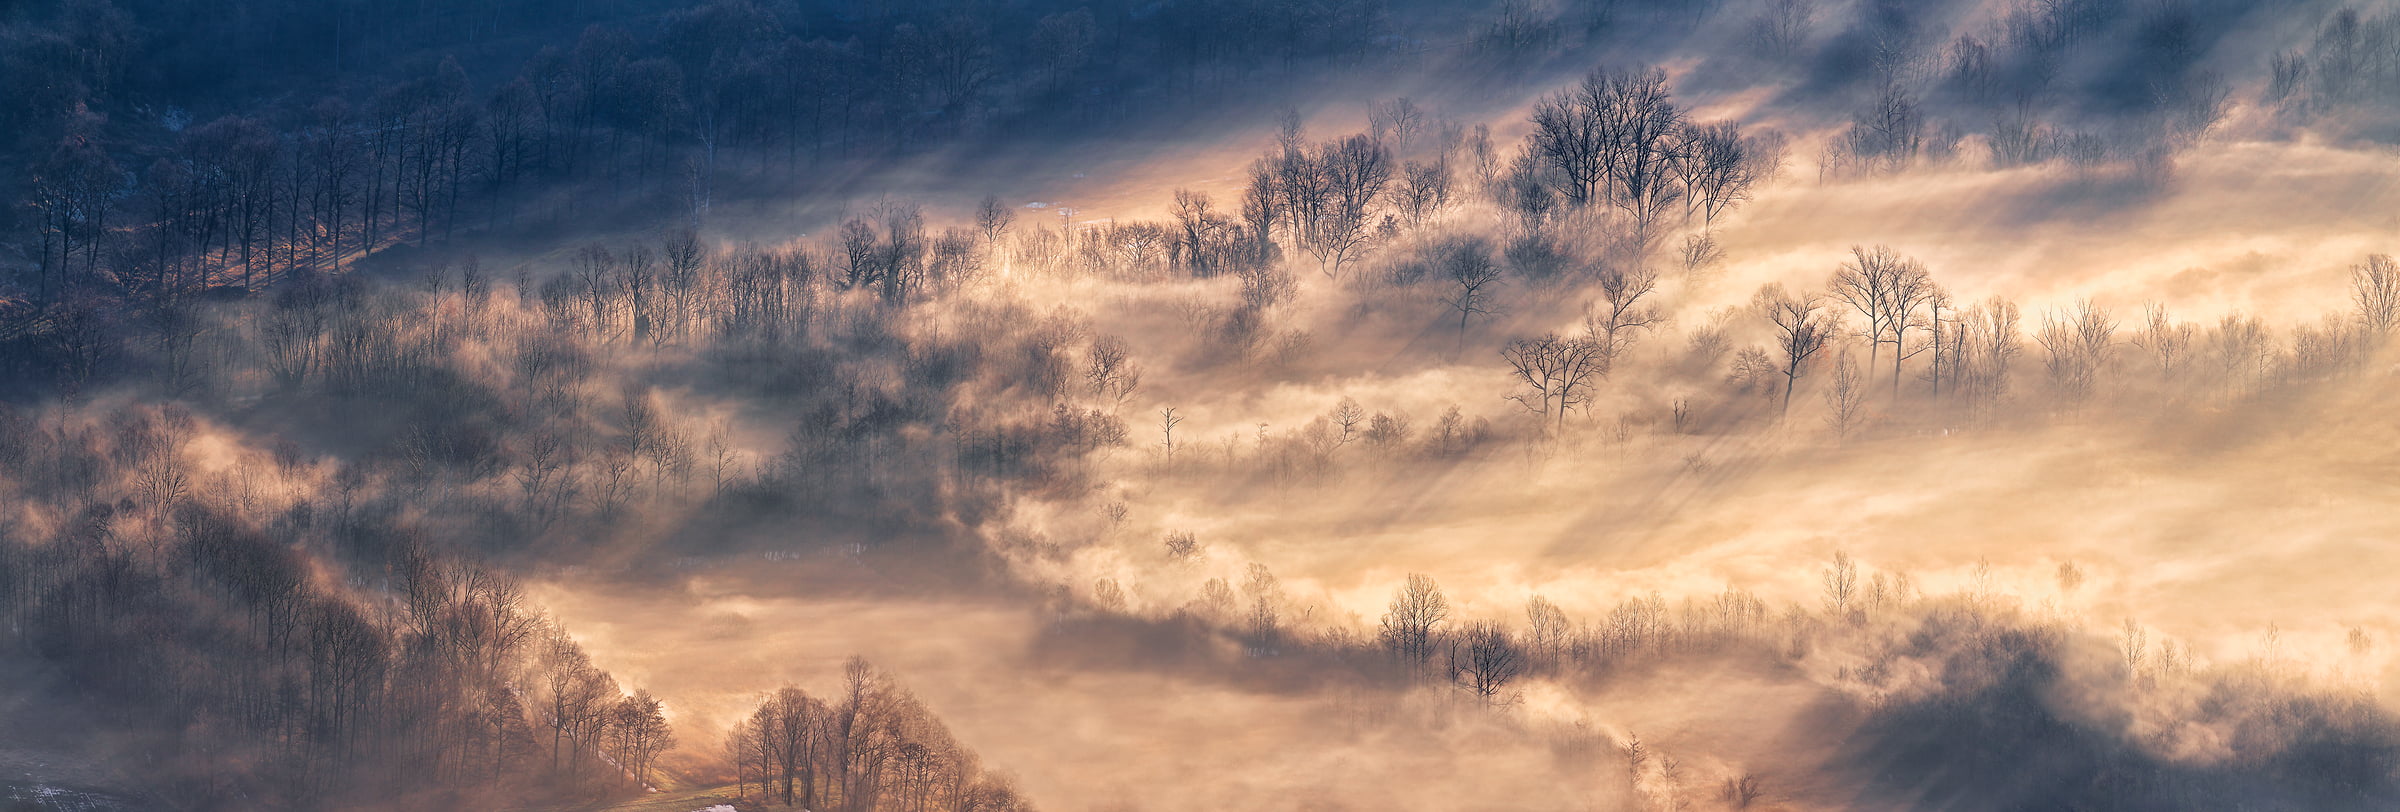 109 megapixels! A very high resolution, large-format VAST photo print of sun rays and trees at sunrise; landscape photograph created by Duilio Fiorille in Avigliana, Piedmont, Italy.